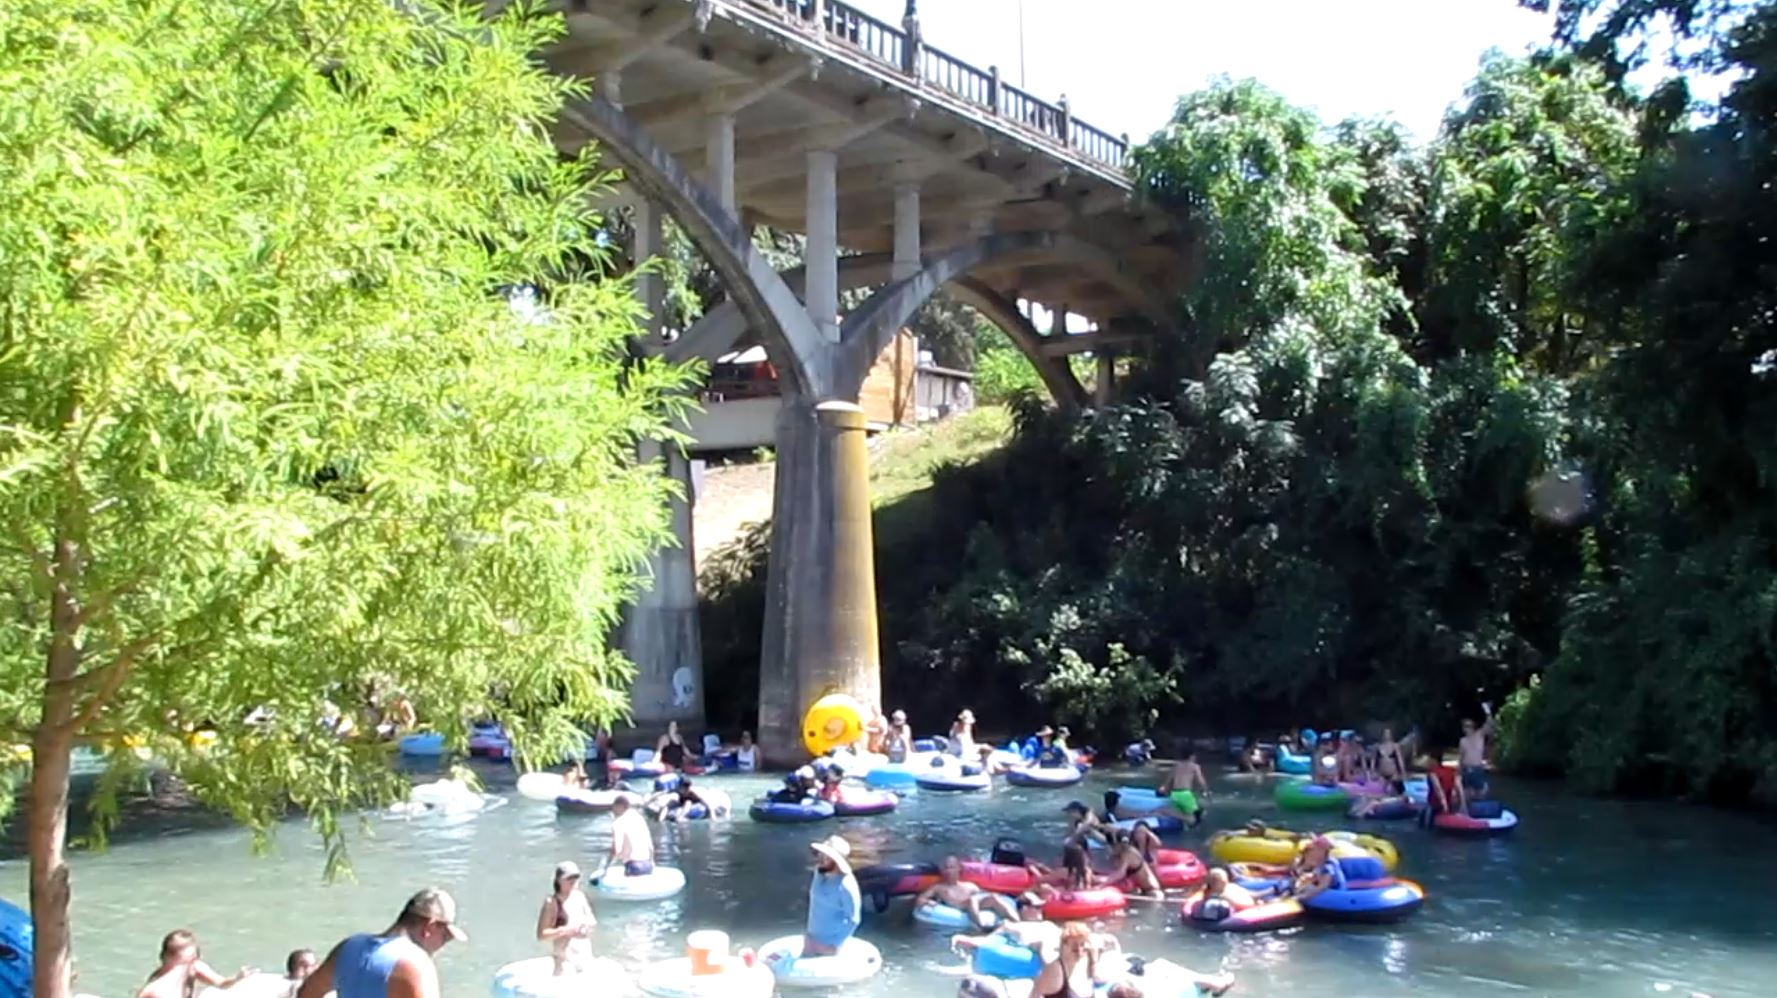 San Antonio Street Bridge Renovation Project... this was the day before construction began - and the last day of Tubing on the Comal River allowing passage under the Bridge, Sunday 9-22-2019 - Texas Tubes in New Braunfels